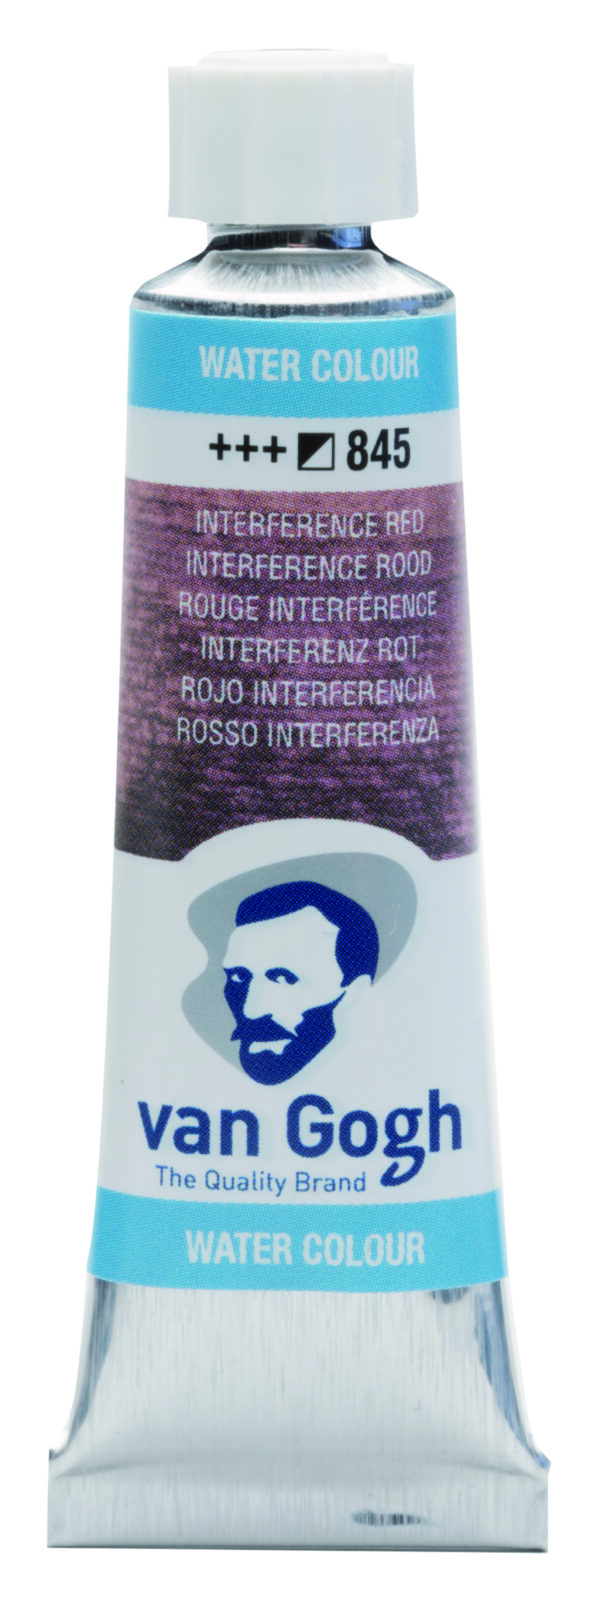 Van Gogh 845 Interference Red - 10 ml